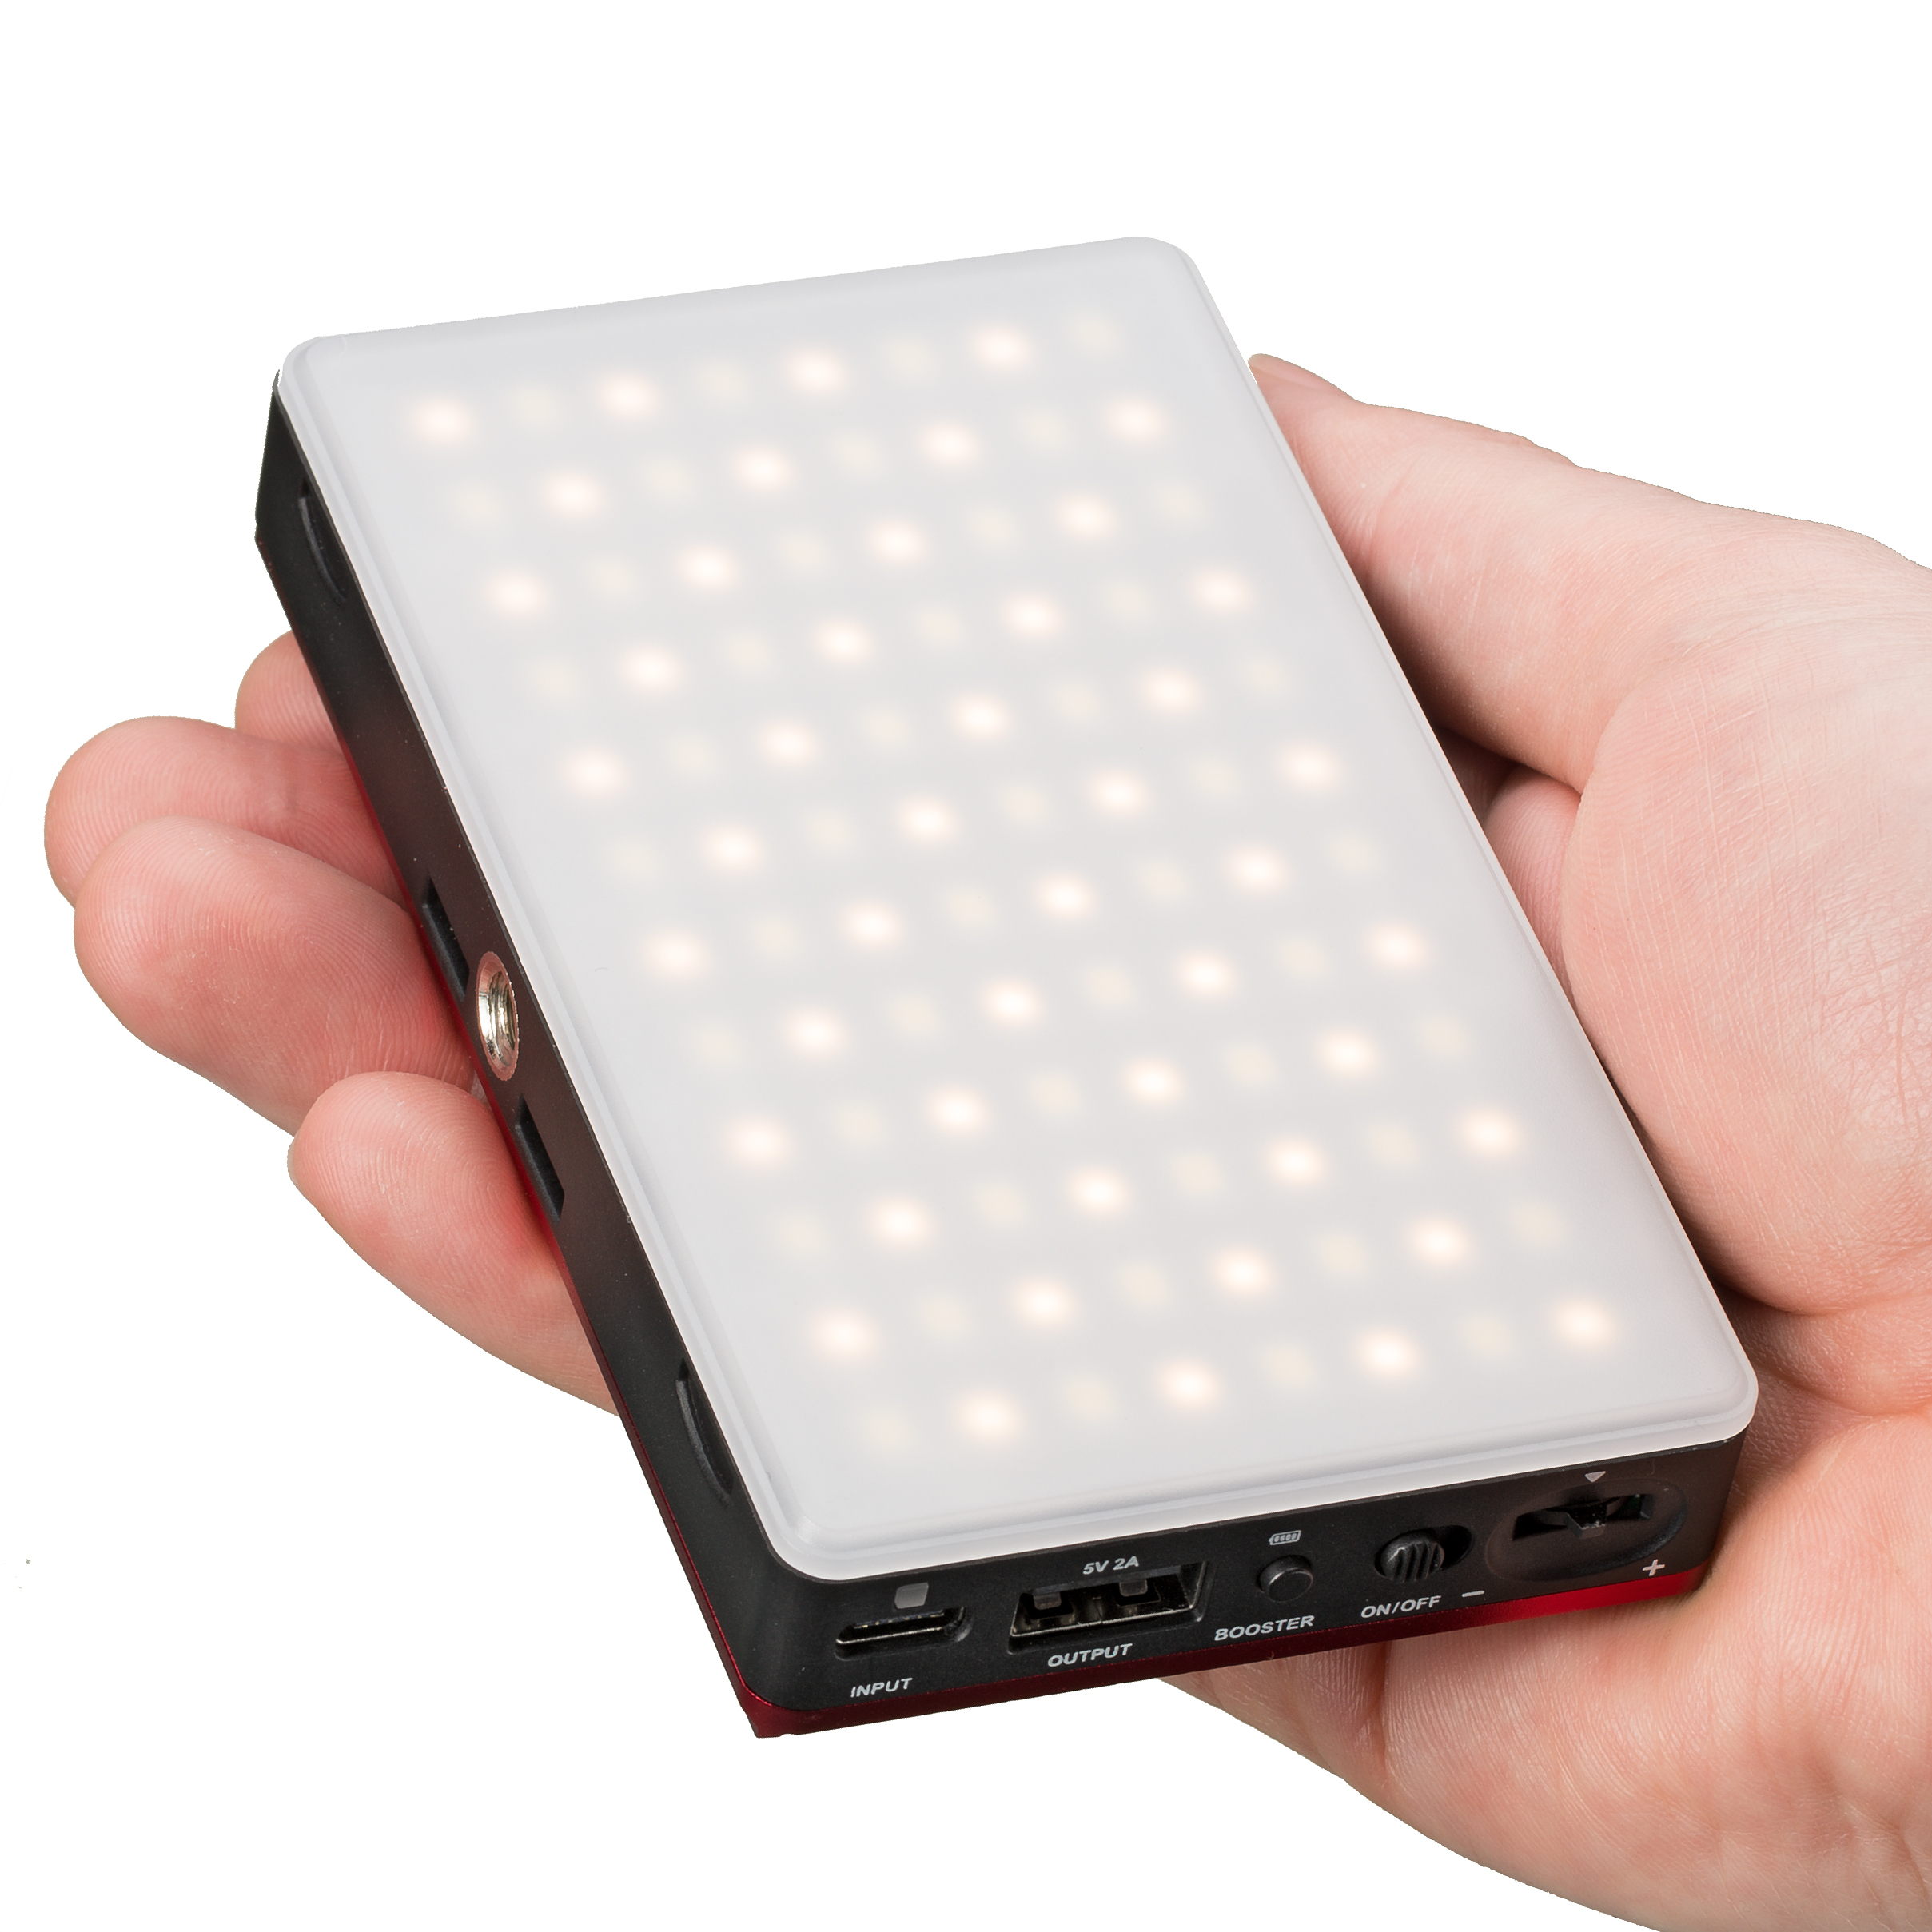 BRESSER Pocket LED 9 W Bi-Colour continuous Panel Light for on-the-go Use and Smartphone Photography